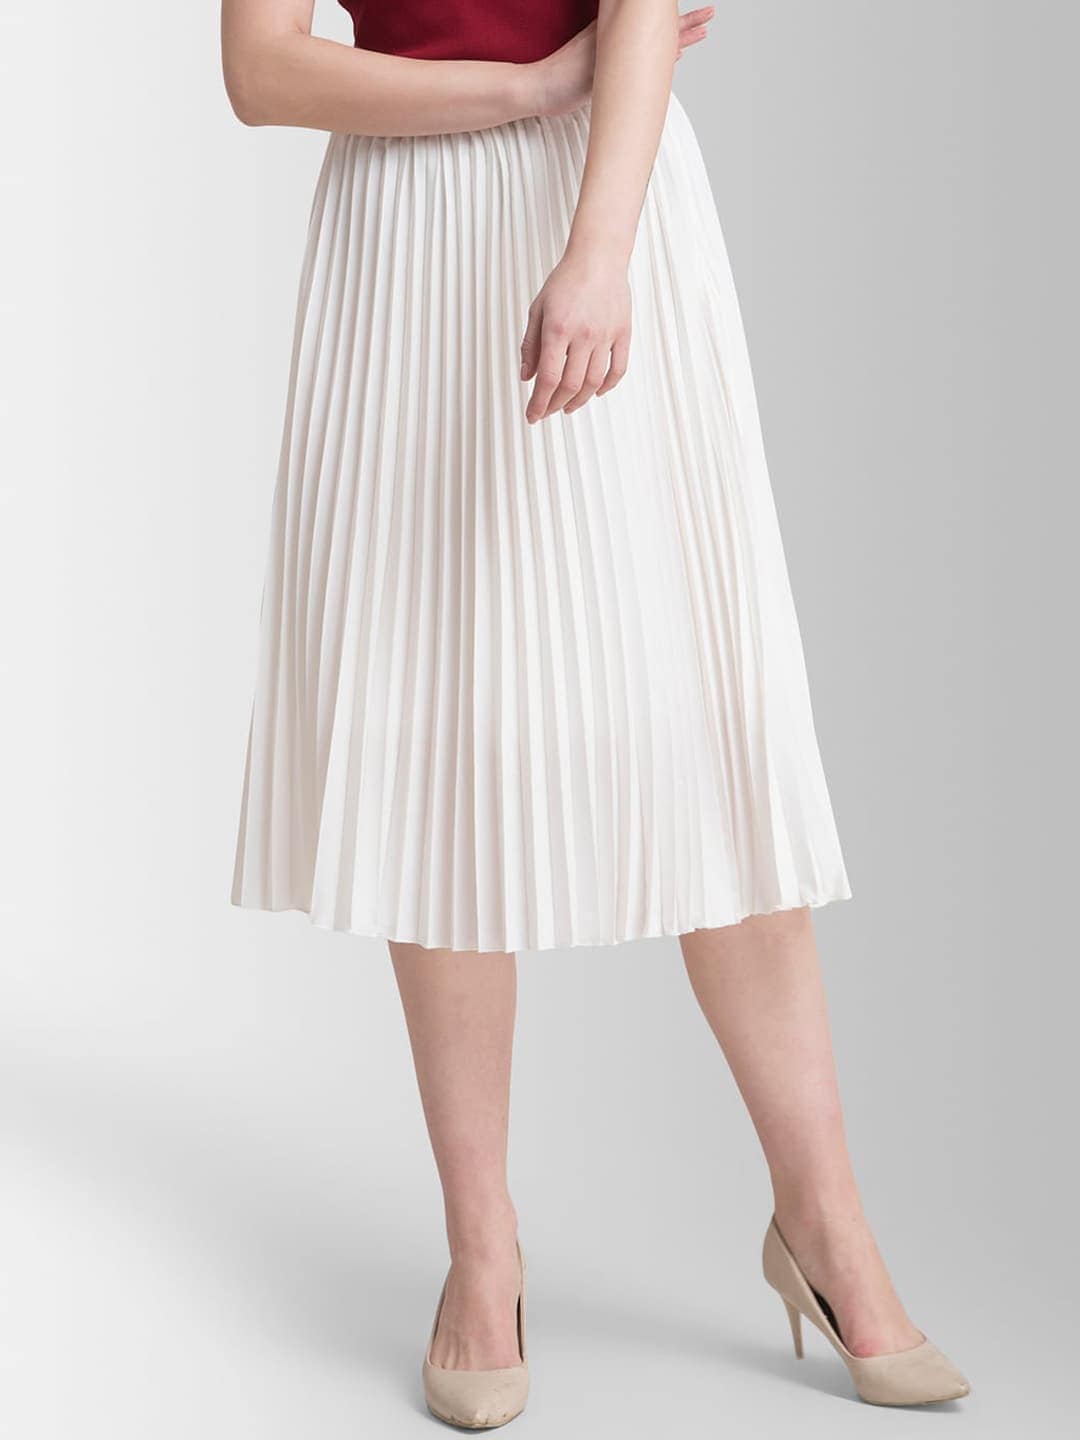 FableStreet White Accordion Pleated A-Line Midi Skirt Price in India